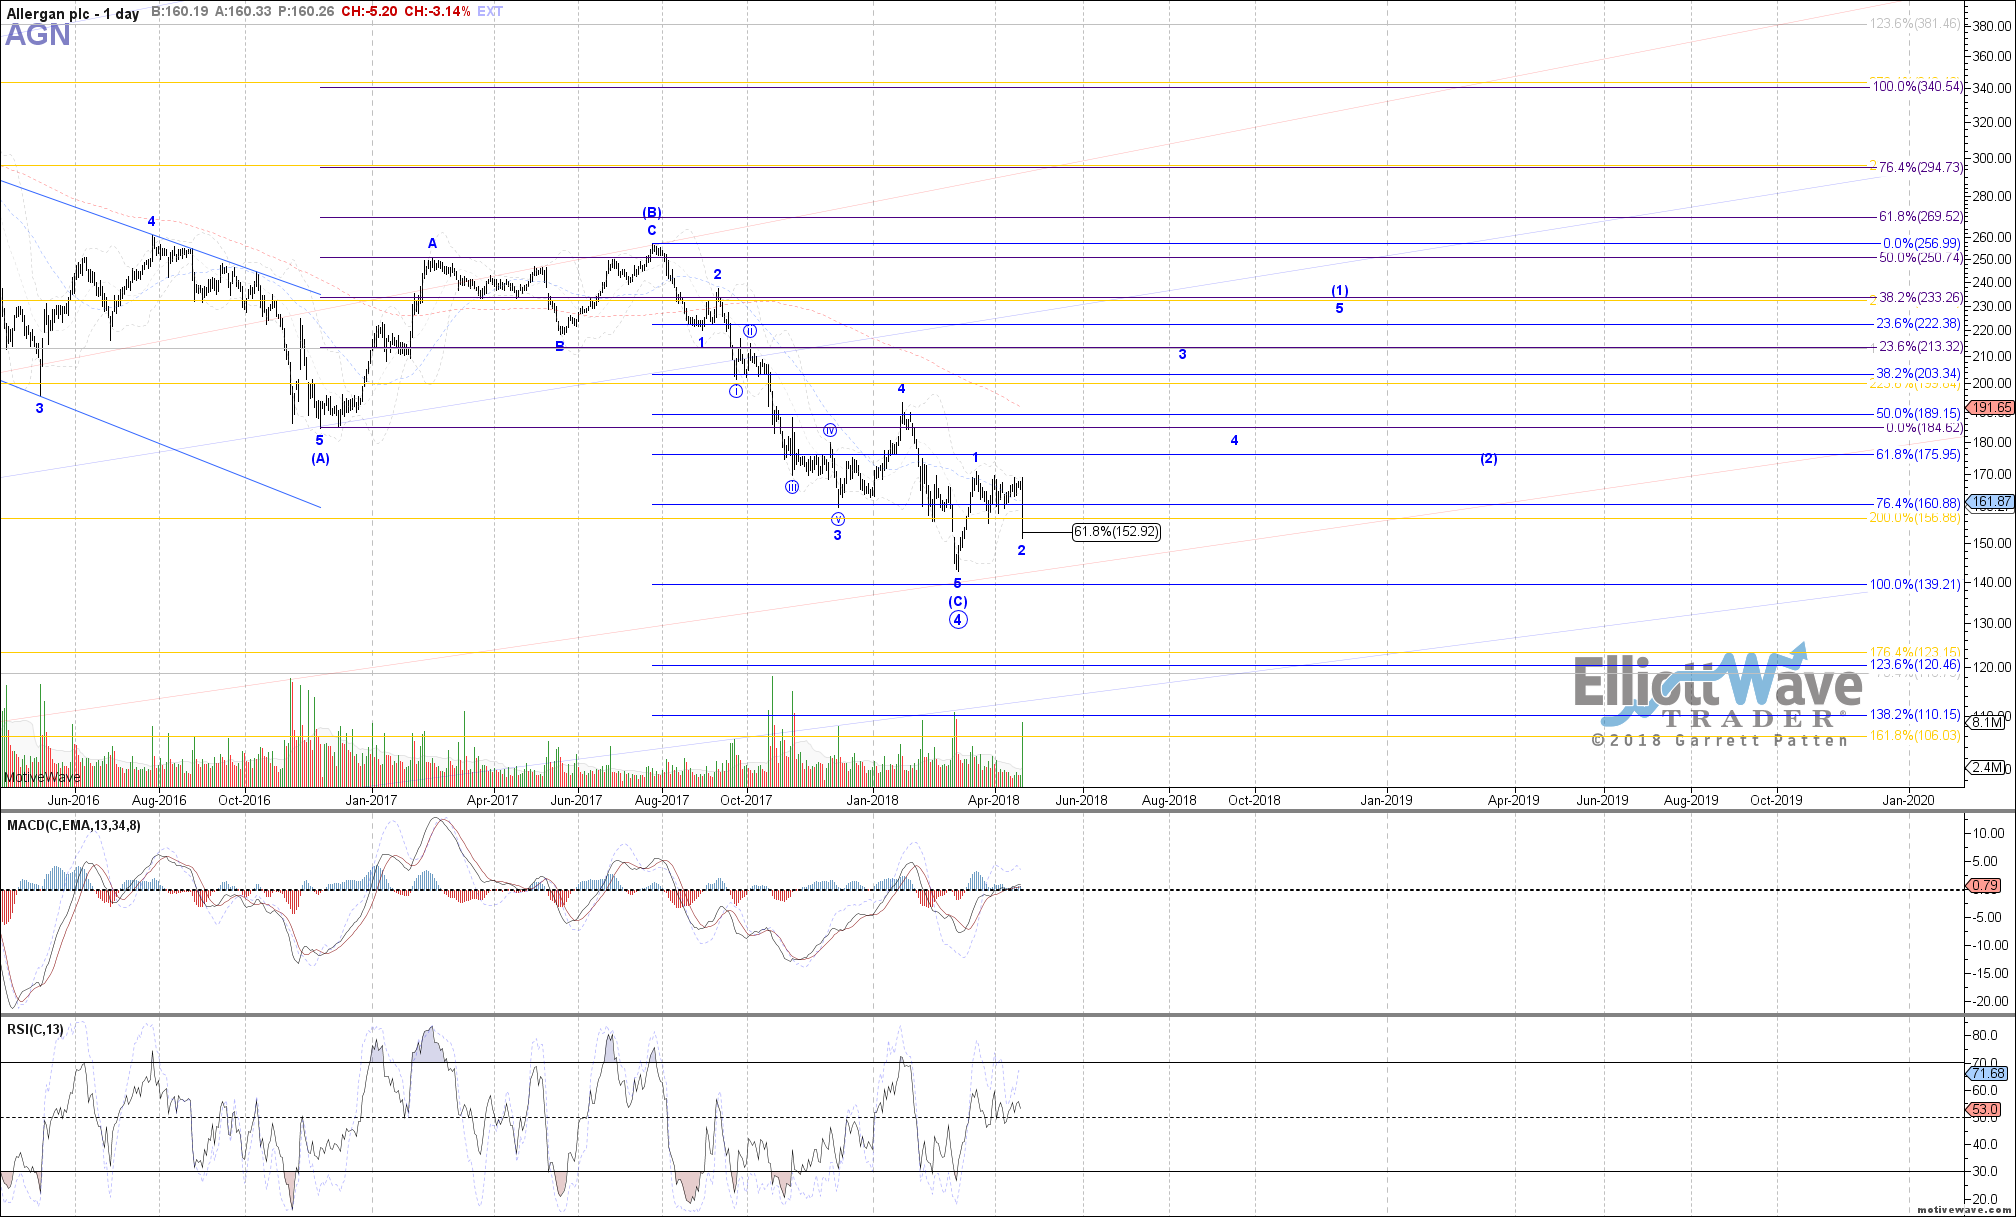 AGN - Primary Analysis - Apr-19 0950 AM (1 day)